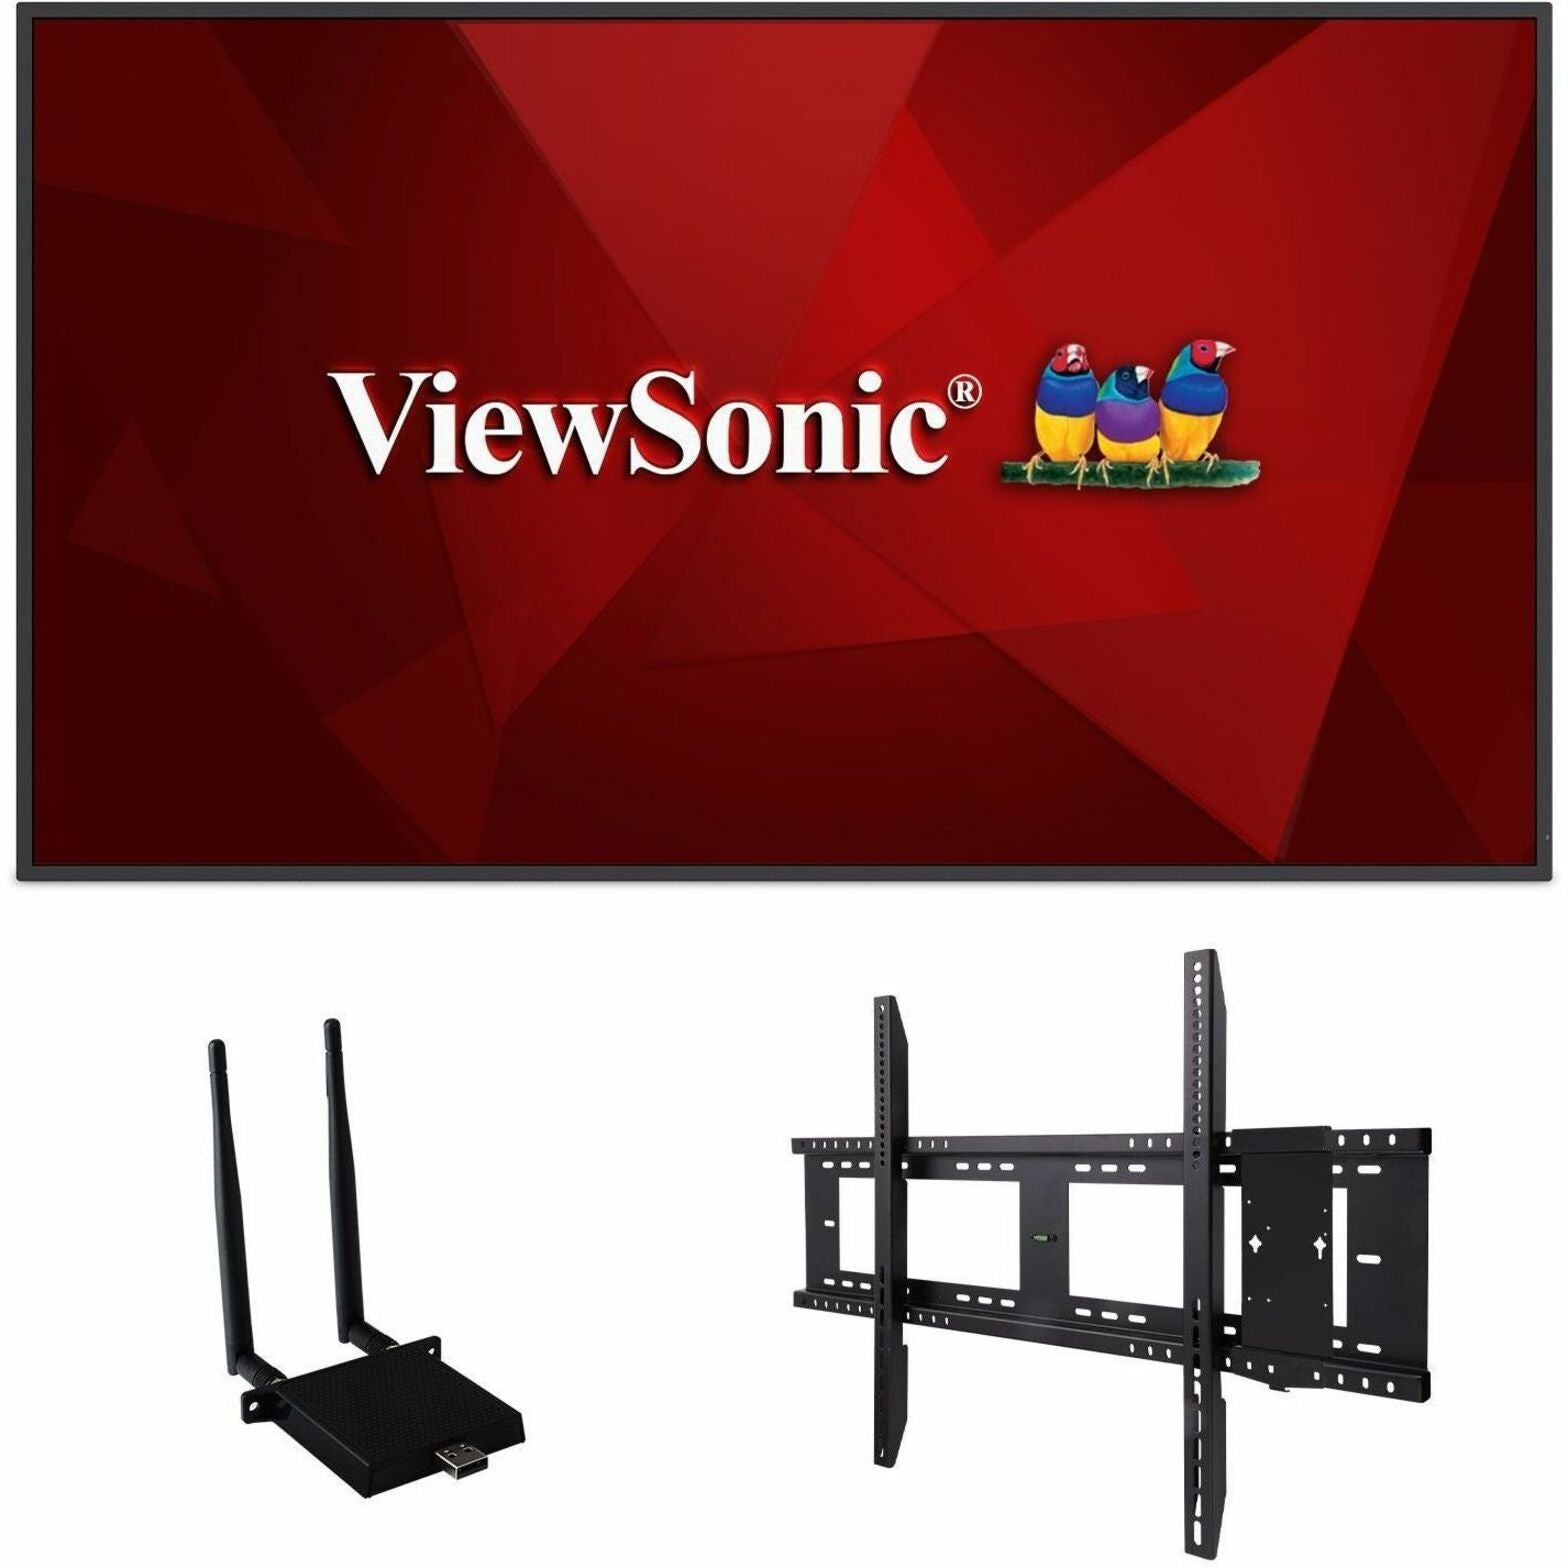 ViewSonic CDE4330-E1 Digital Signage Display, 4K, Integrated Software, WiFi Adapter and Fixed Wall Mount